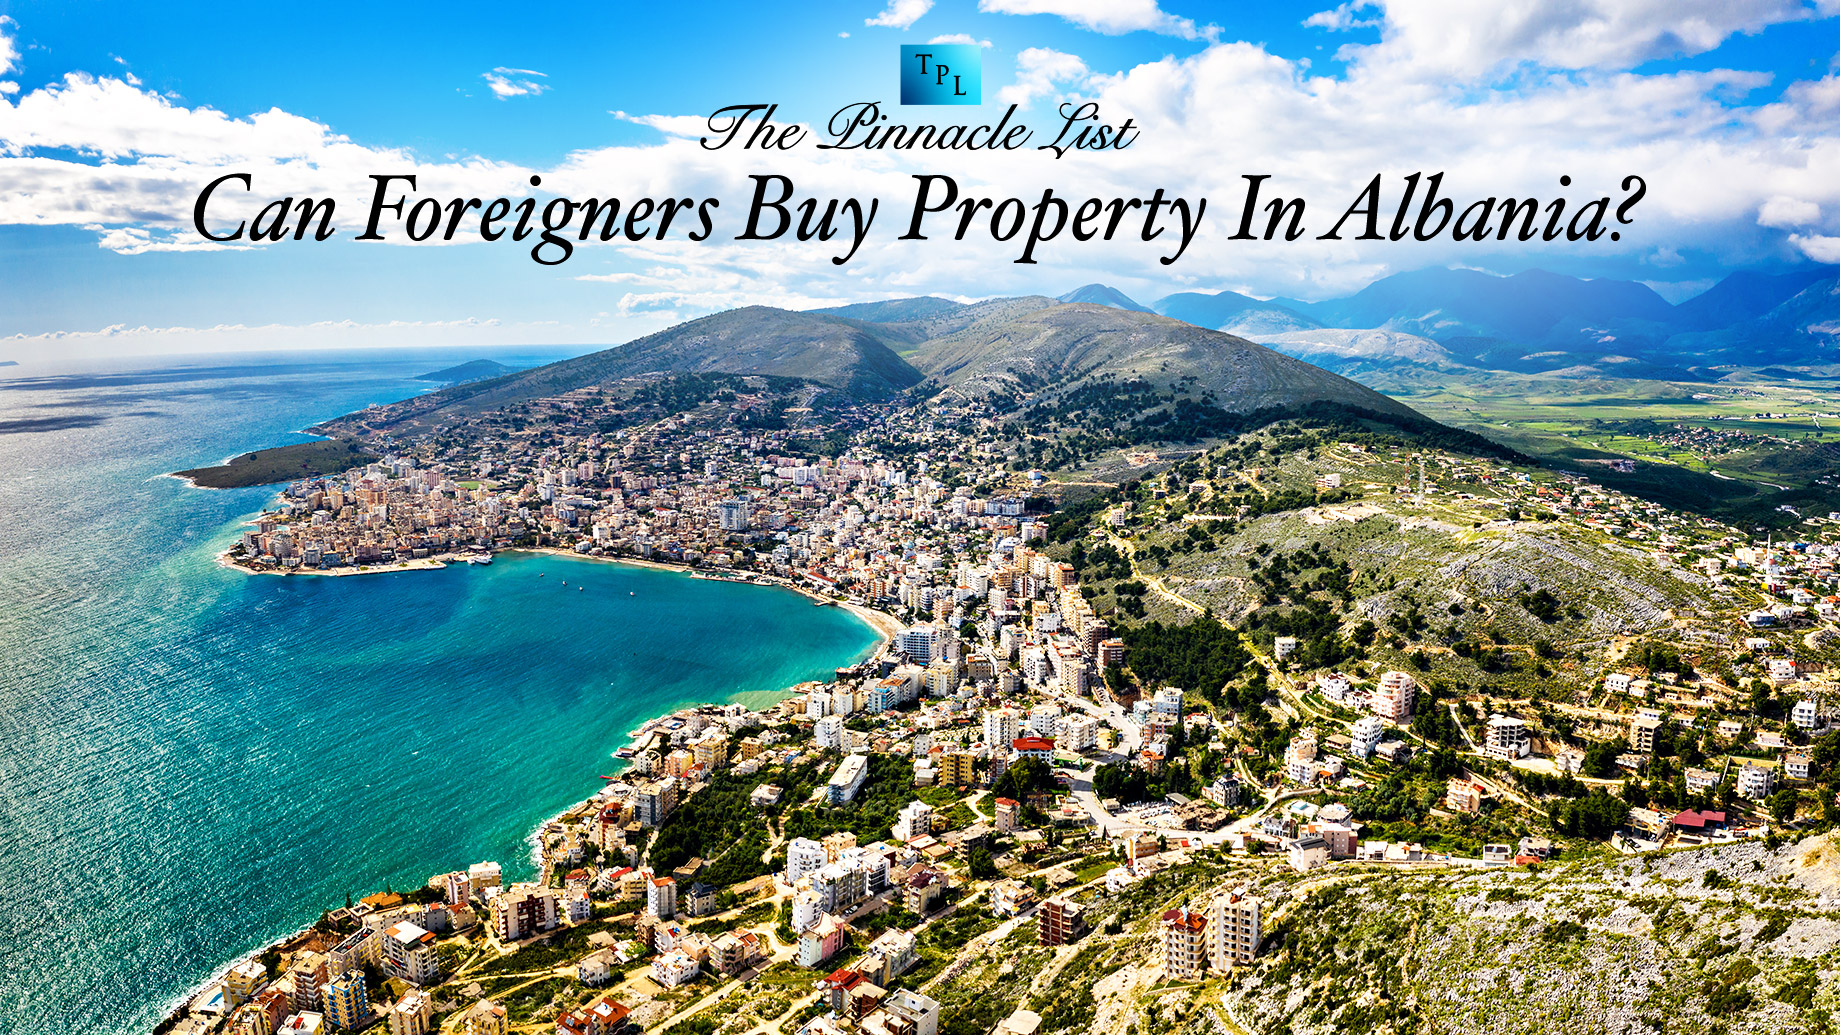 Can Foreigners Buy Property In Albania?